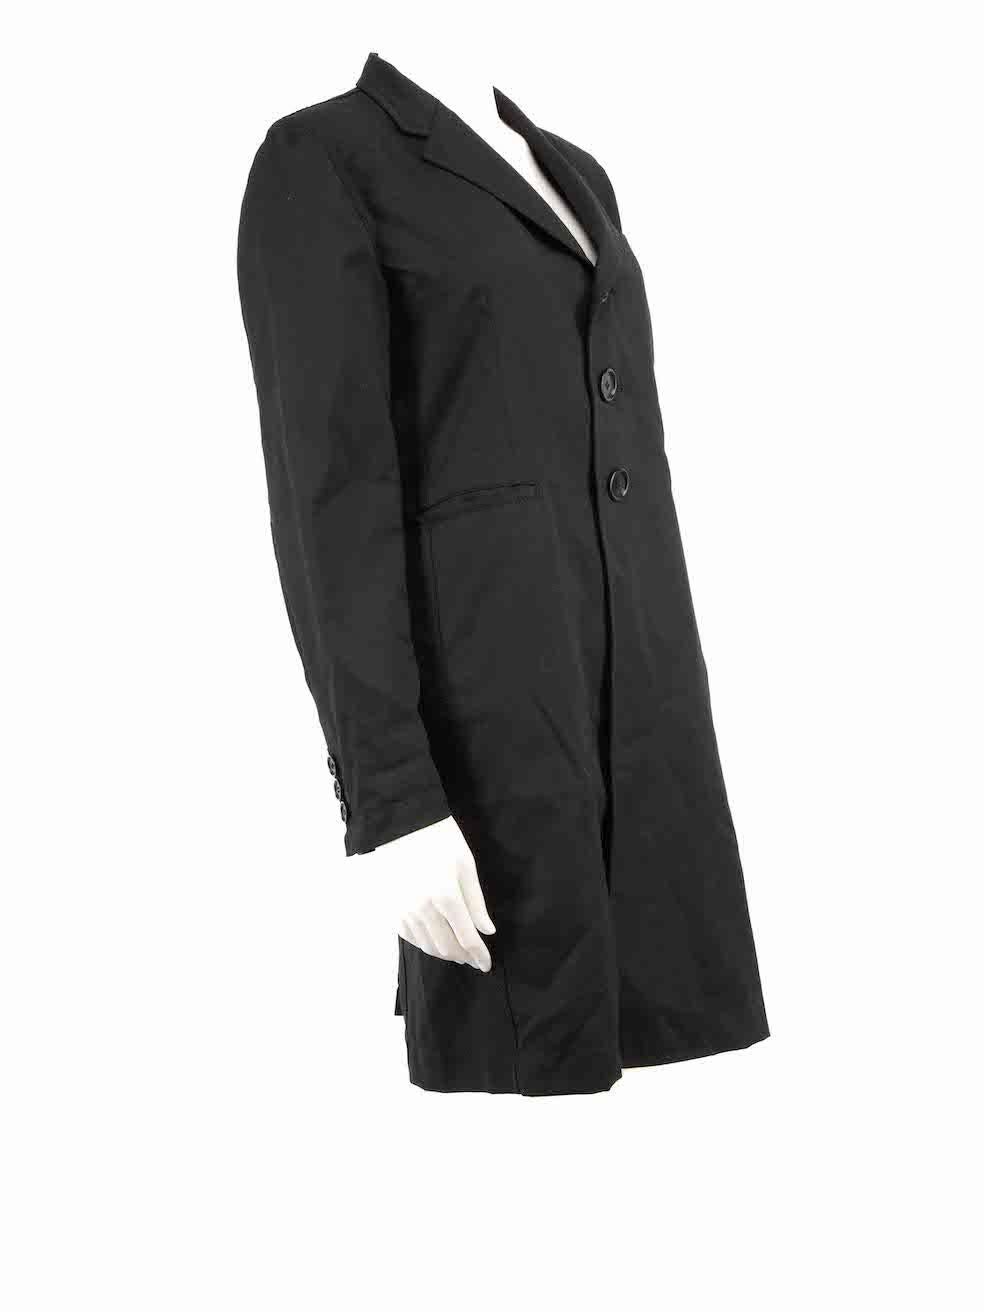 CONDITION is Very good. Hardly any visible wear to coat is evident on this used Comme Des Garcons BLACK designer resale item.
 
 Details
 Black
 Wool
 Coat
 Button up fastening
 Buttoned cuffs
 3x Front pockets
 
 
 Made in Japan
 
 Composition
